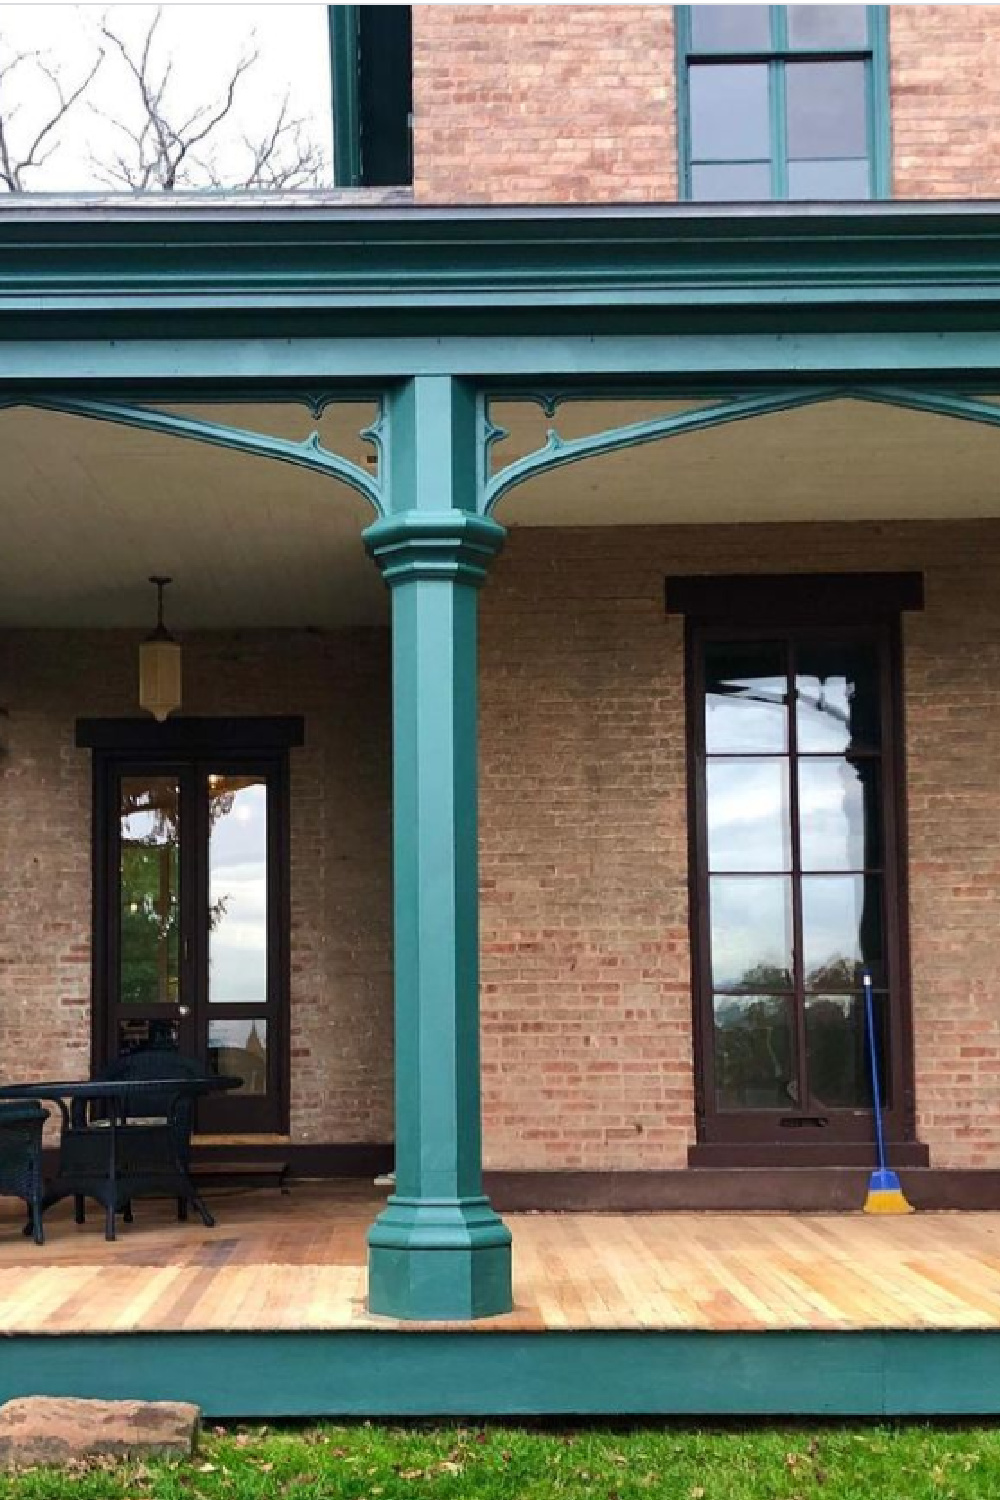 Tarrytown Green paint color (Benjamin Moore) on trim of a beautiful historic rick home - @rosshand1859. #tarrytowngreen #benjaminmooretarrytowngreen #paintcolors